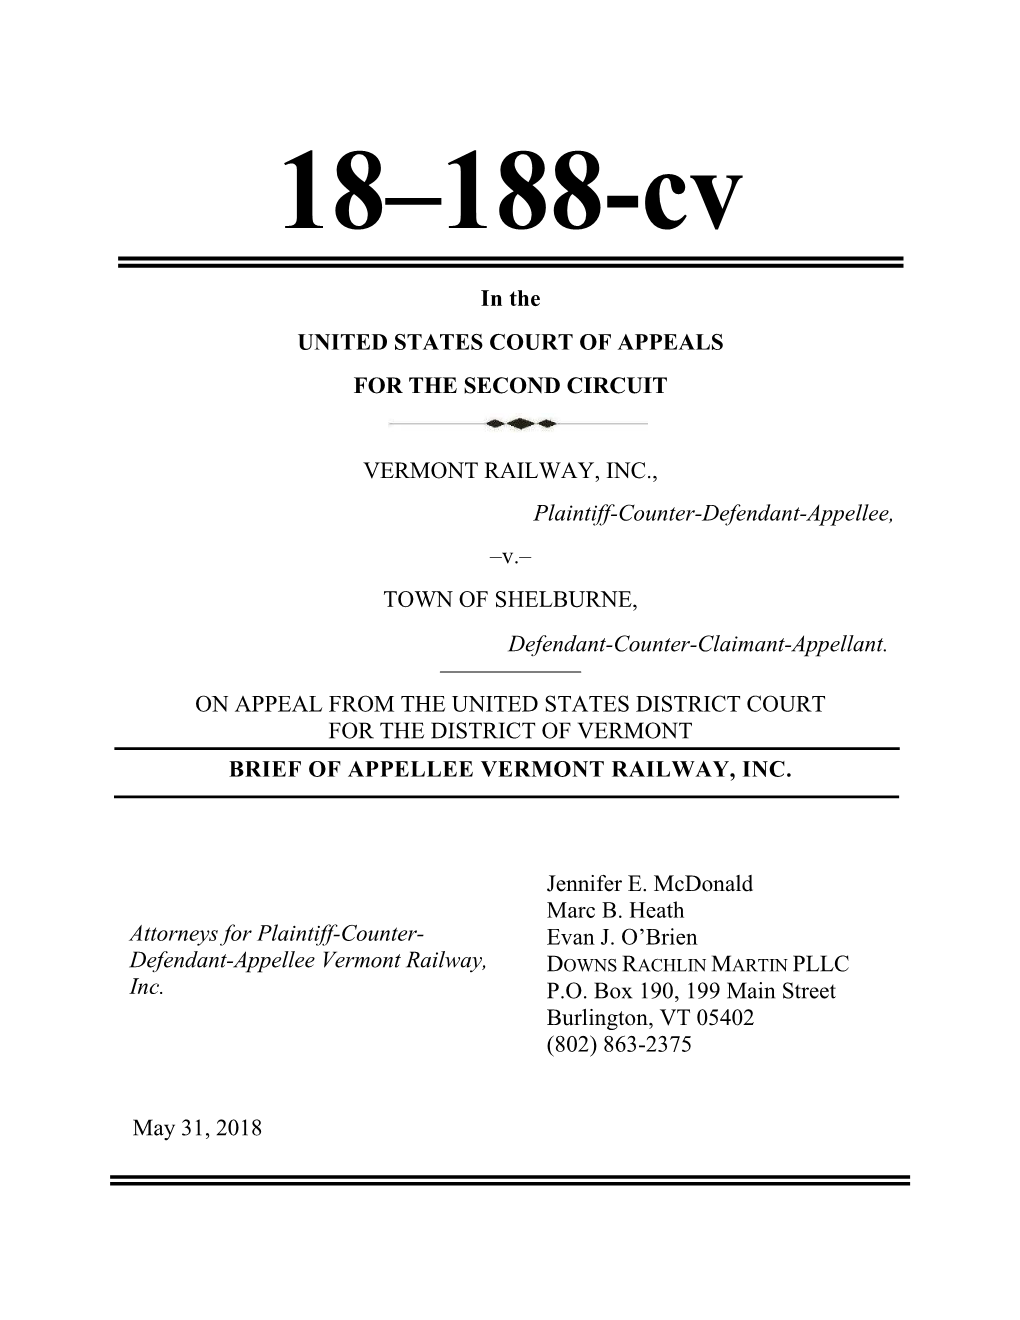 In the UNITED STATES COURT of APPEALS for the SECOND CIRCUIT VERMONT RAILWAY, INC., Plaintiff-Counter-Defendant-Appellee